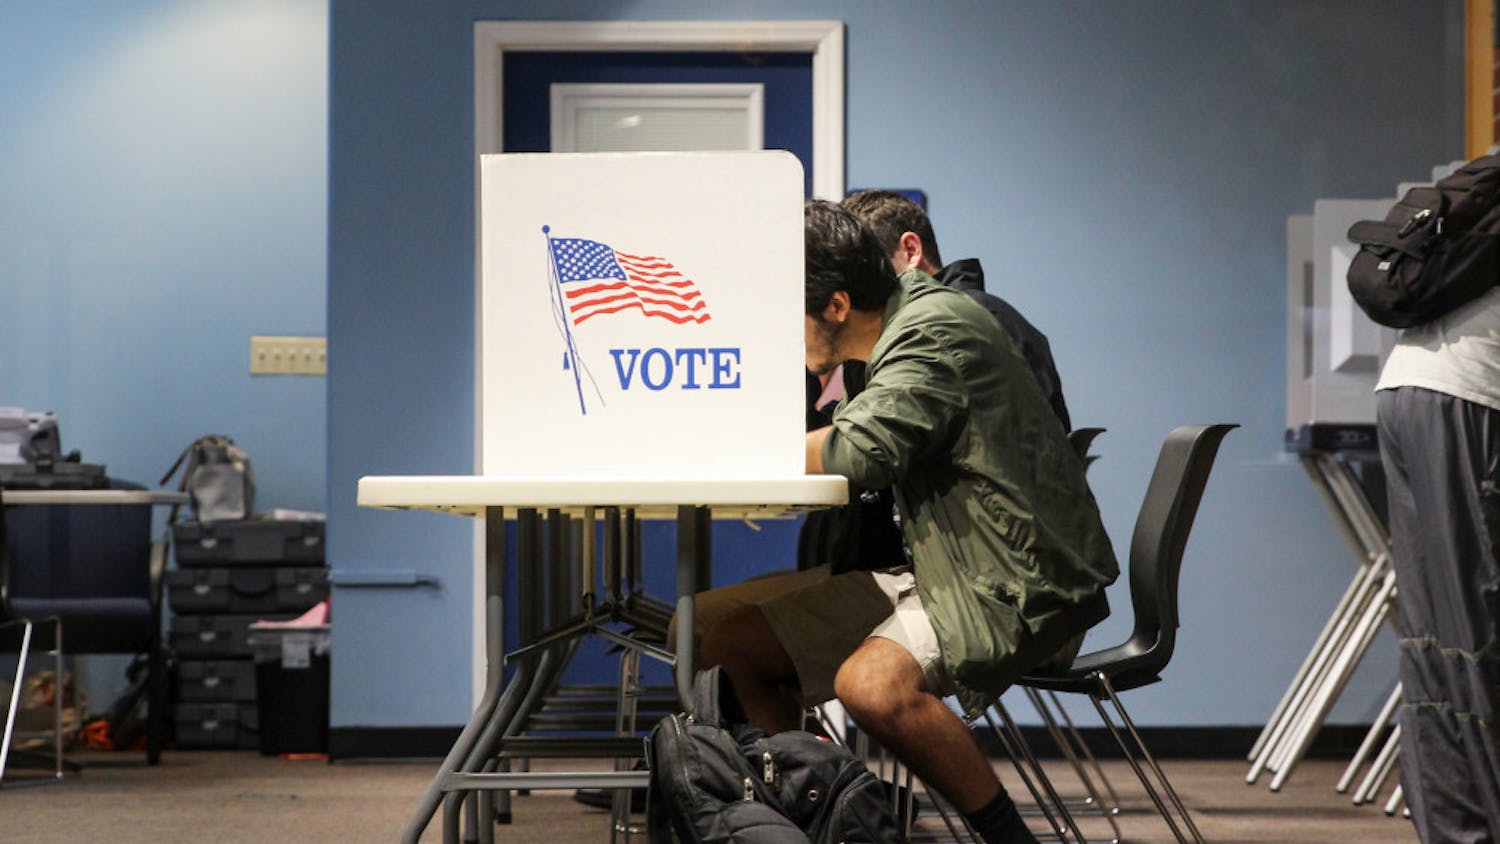 Nestor Garcia, a 21-year-old industrial engineer major, attends the early voting session on Oct. 22, 2018, at the J. Wayne Reitz Union to vote for the first time.